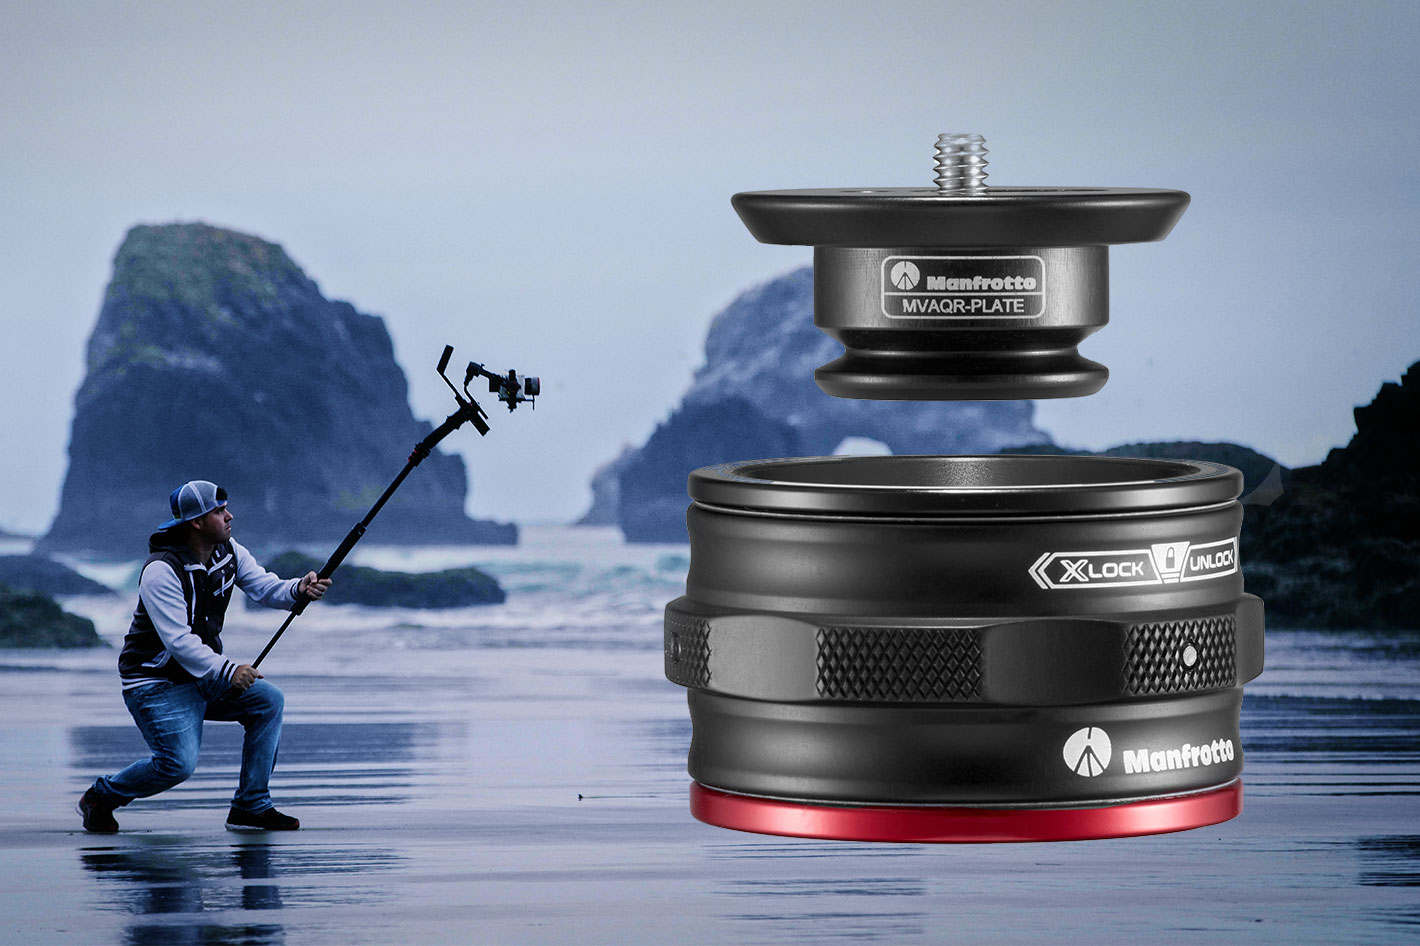 Manfrotto MOVE: a whole new way to move cameras